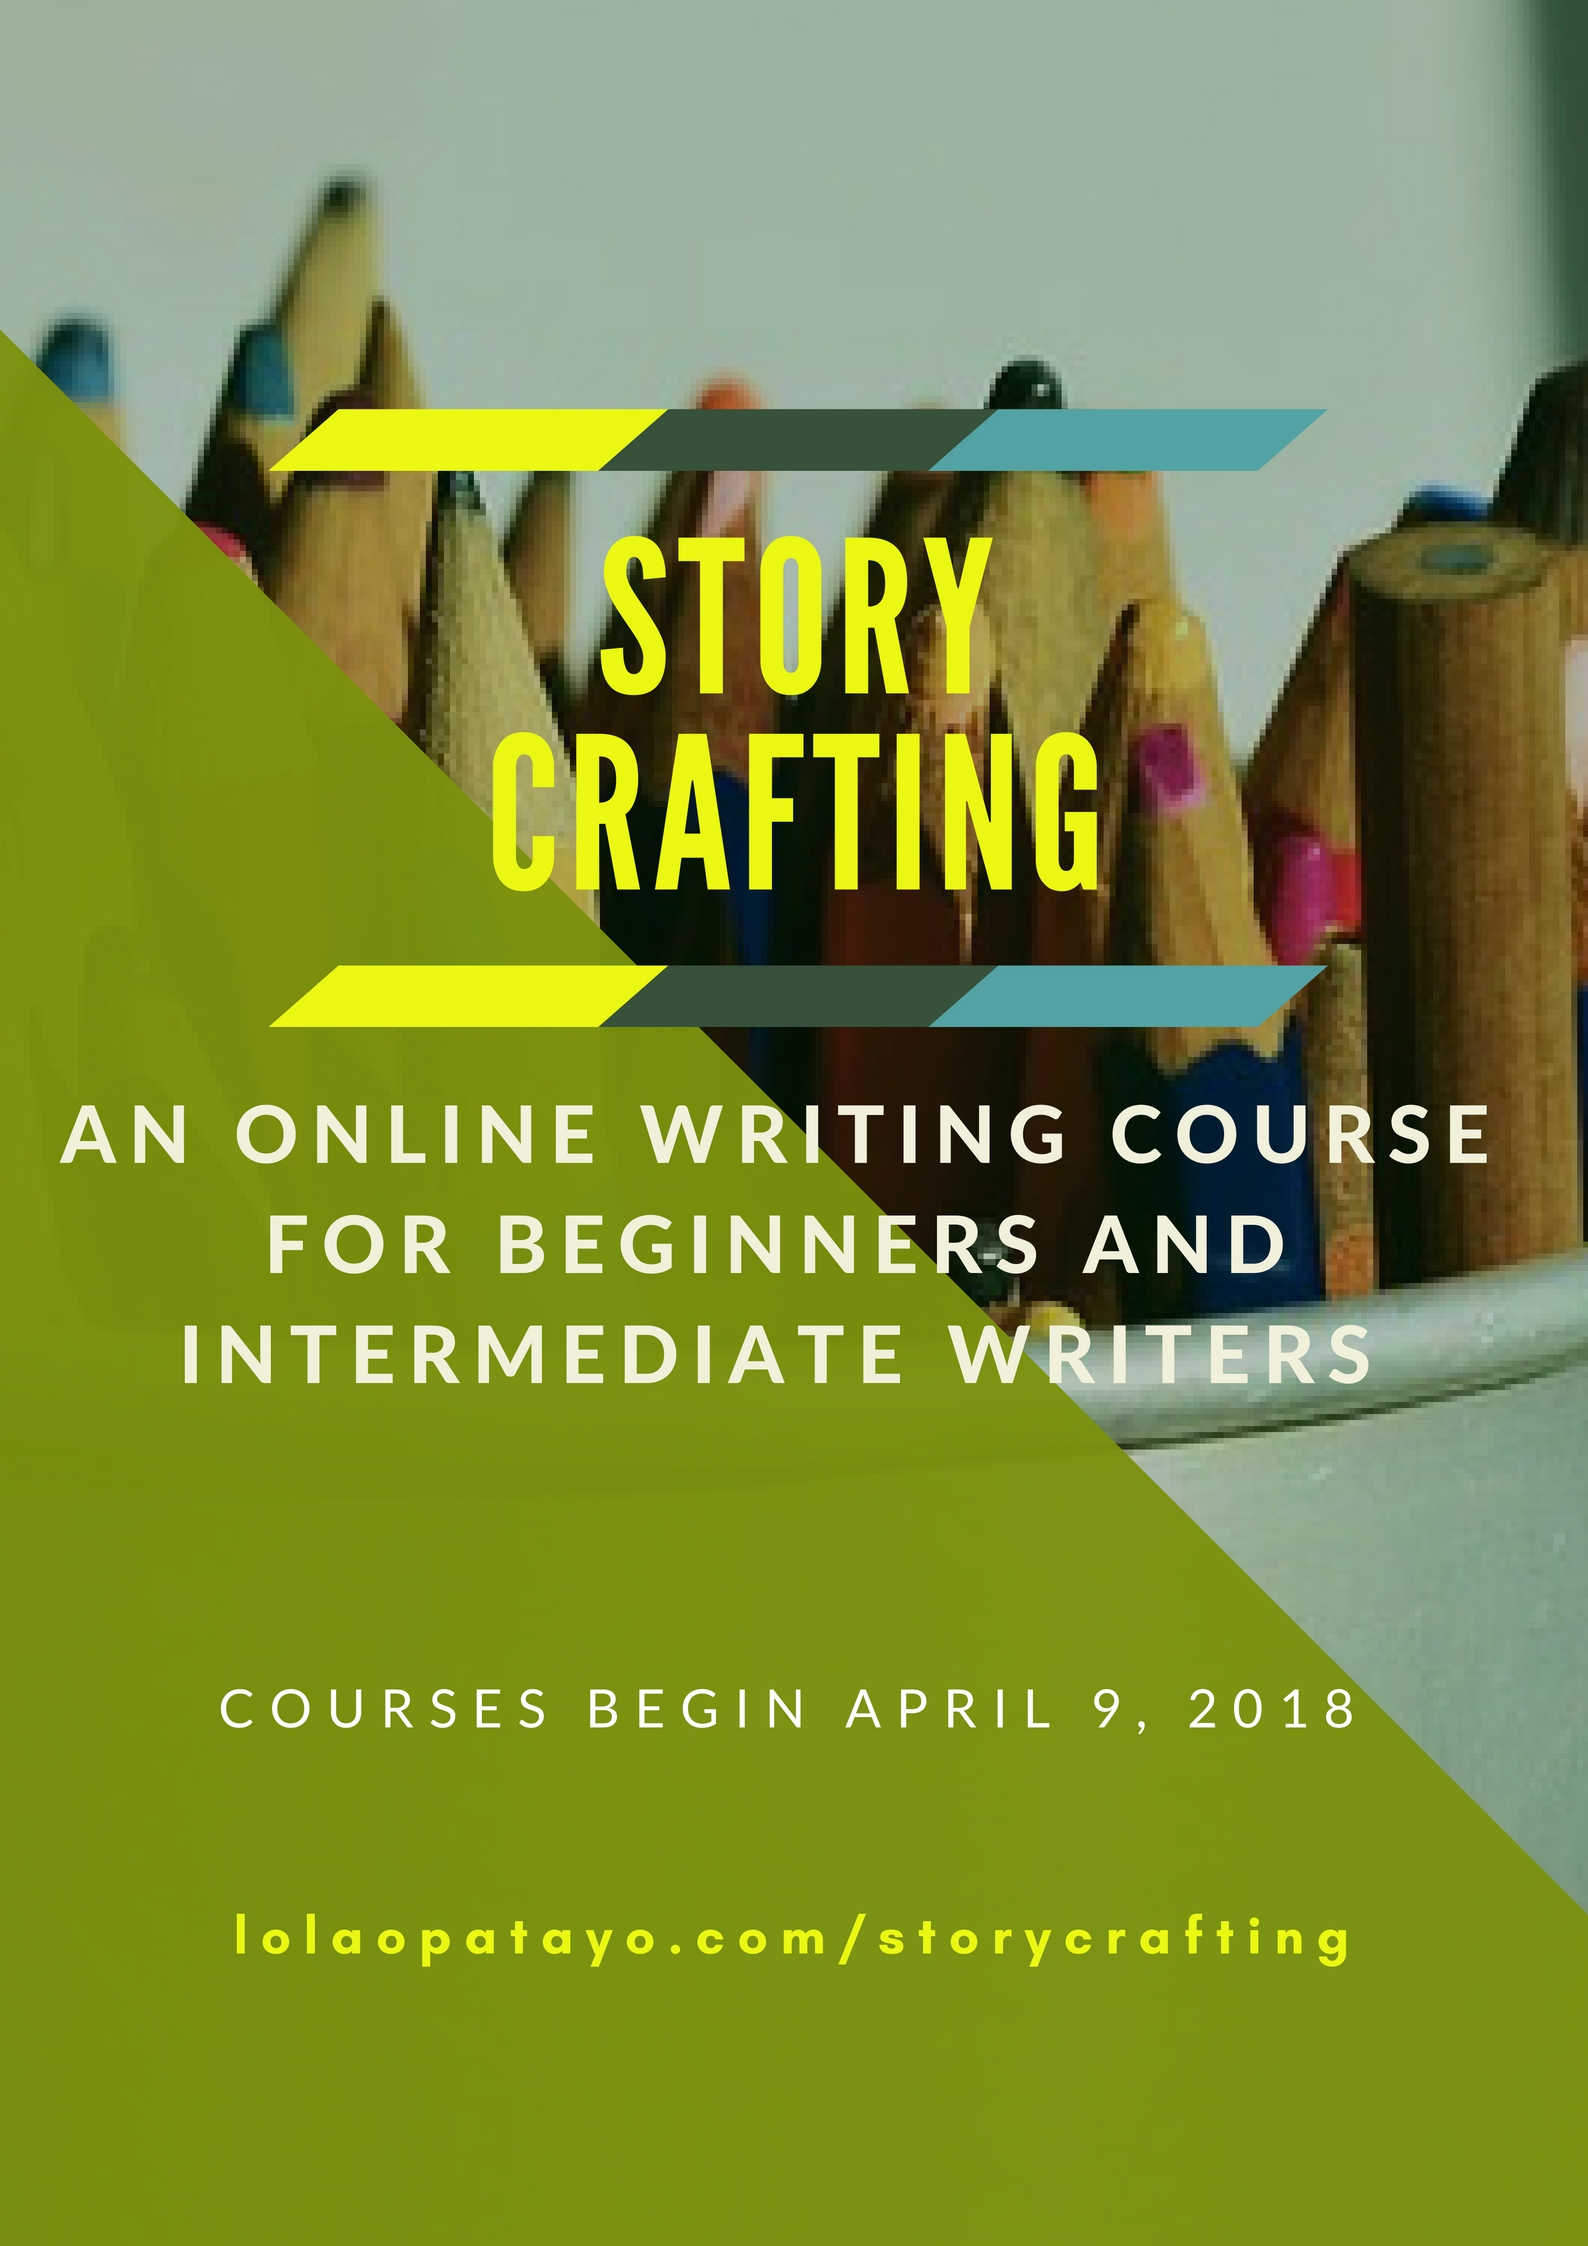 Online Writing Course Available For Aspiring Writers — Register Now